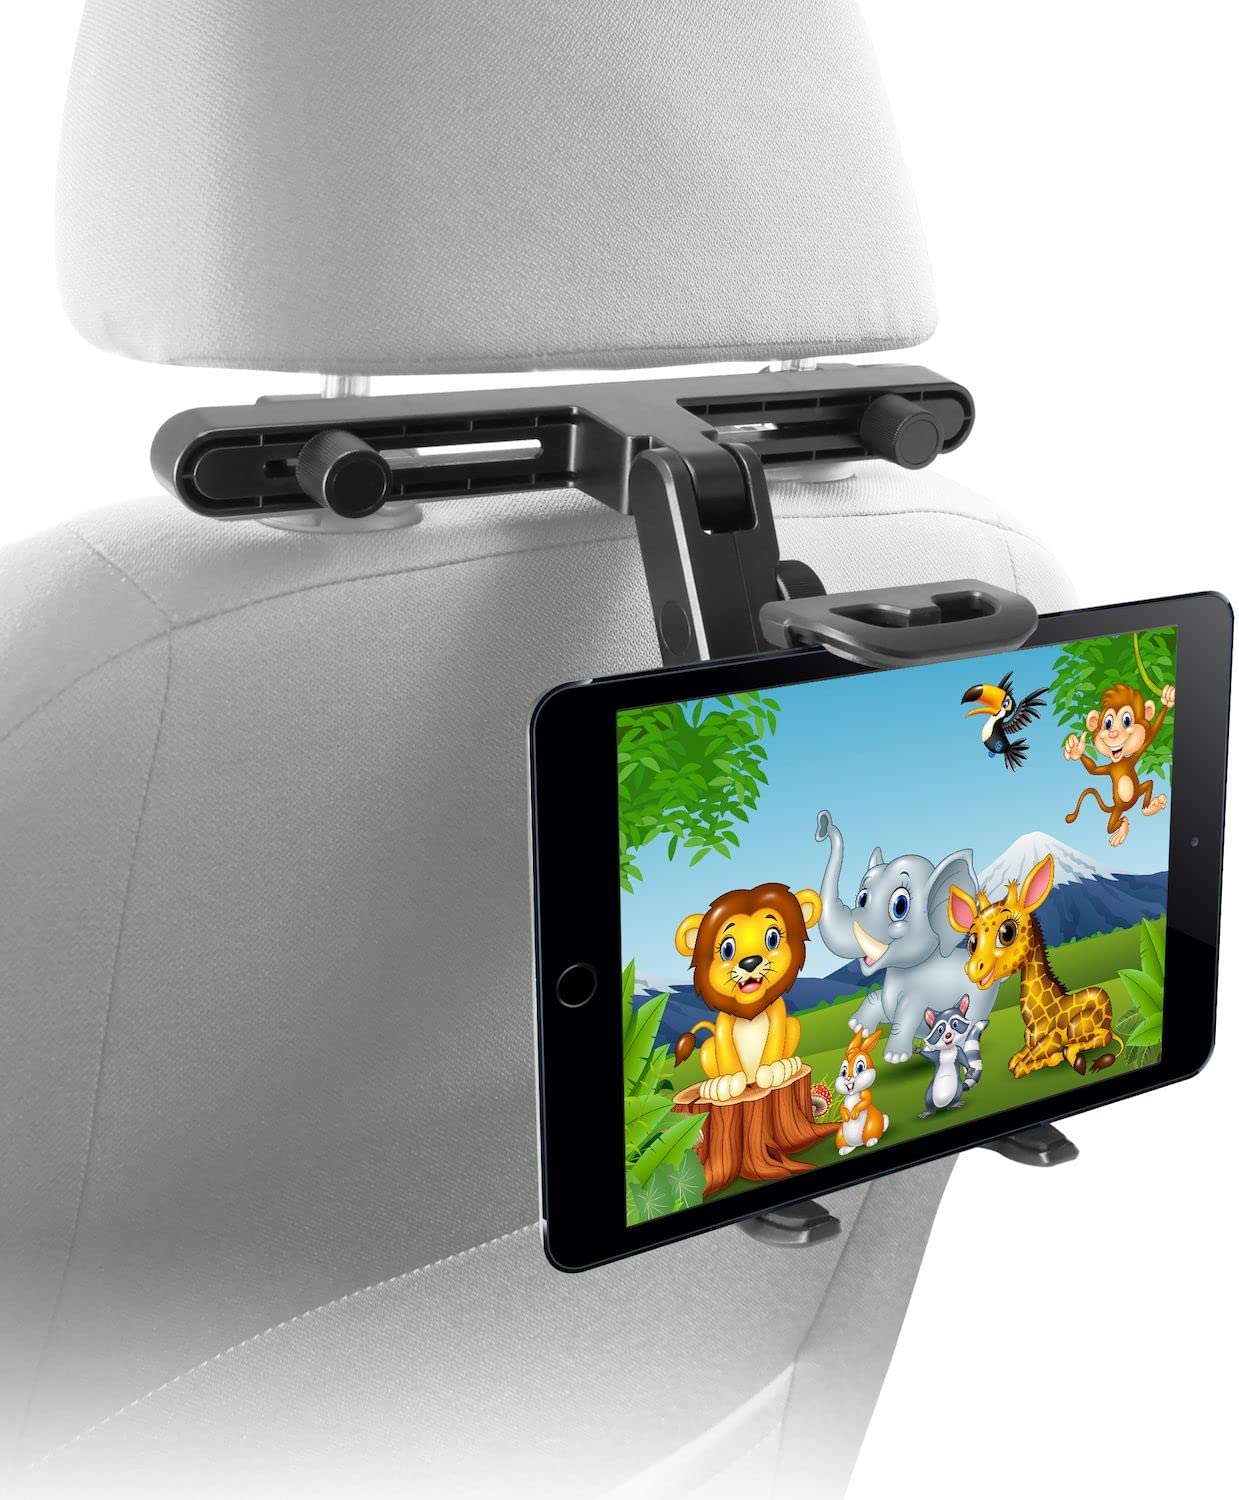 Macally Car Headrest Tablet Holder, Adjustable iPad Car Mount for Kids in Backseat, Compatible with Devices Such as iPad Pro Air Mini, Galaxy Tabs, And 7" to 10" Tablets and Cell Phones - Black - image 1 of 8